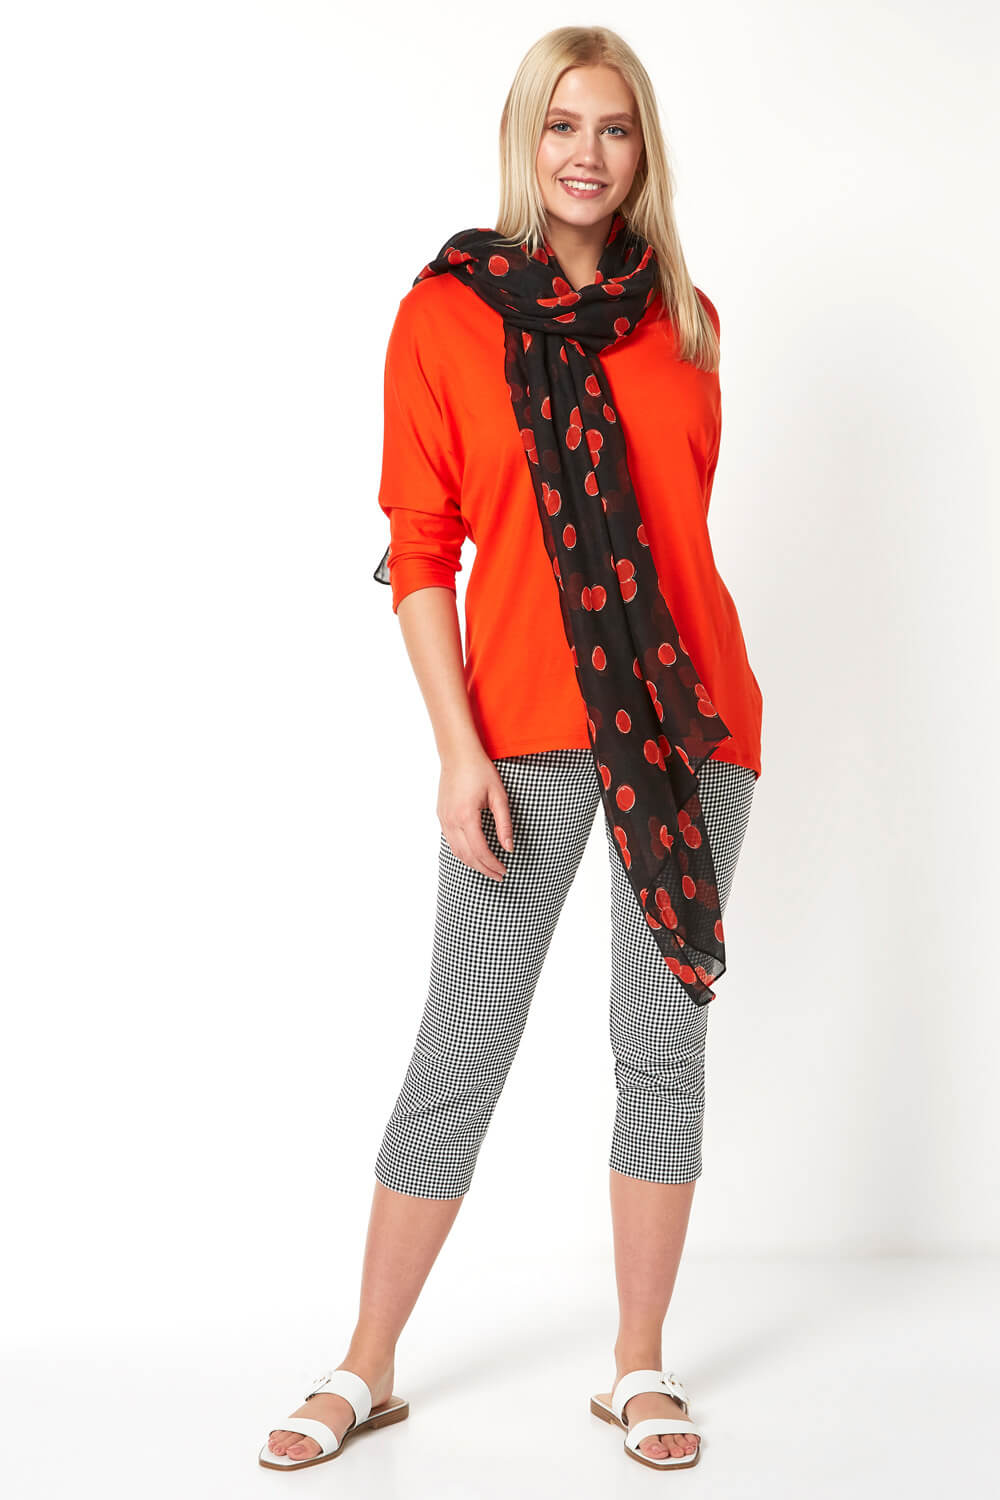 ORANGE Loose T-Shirt and Cherry Print Scarf, Image 2 of 5